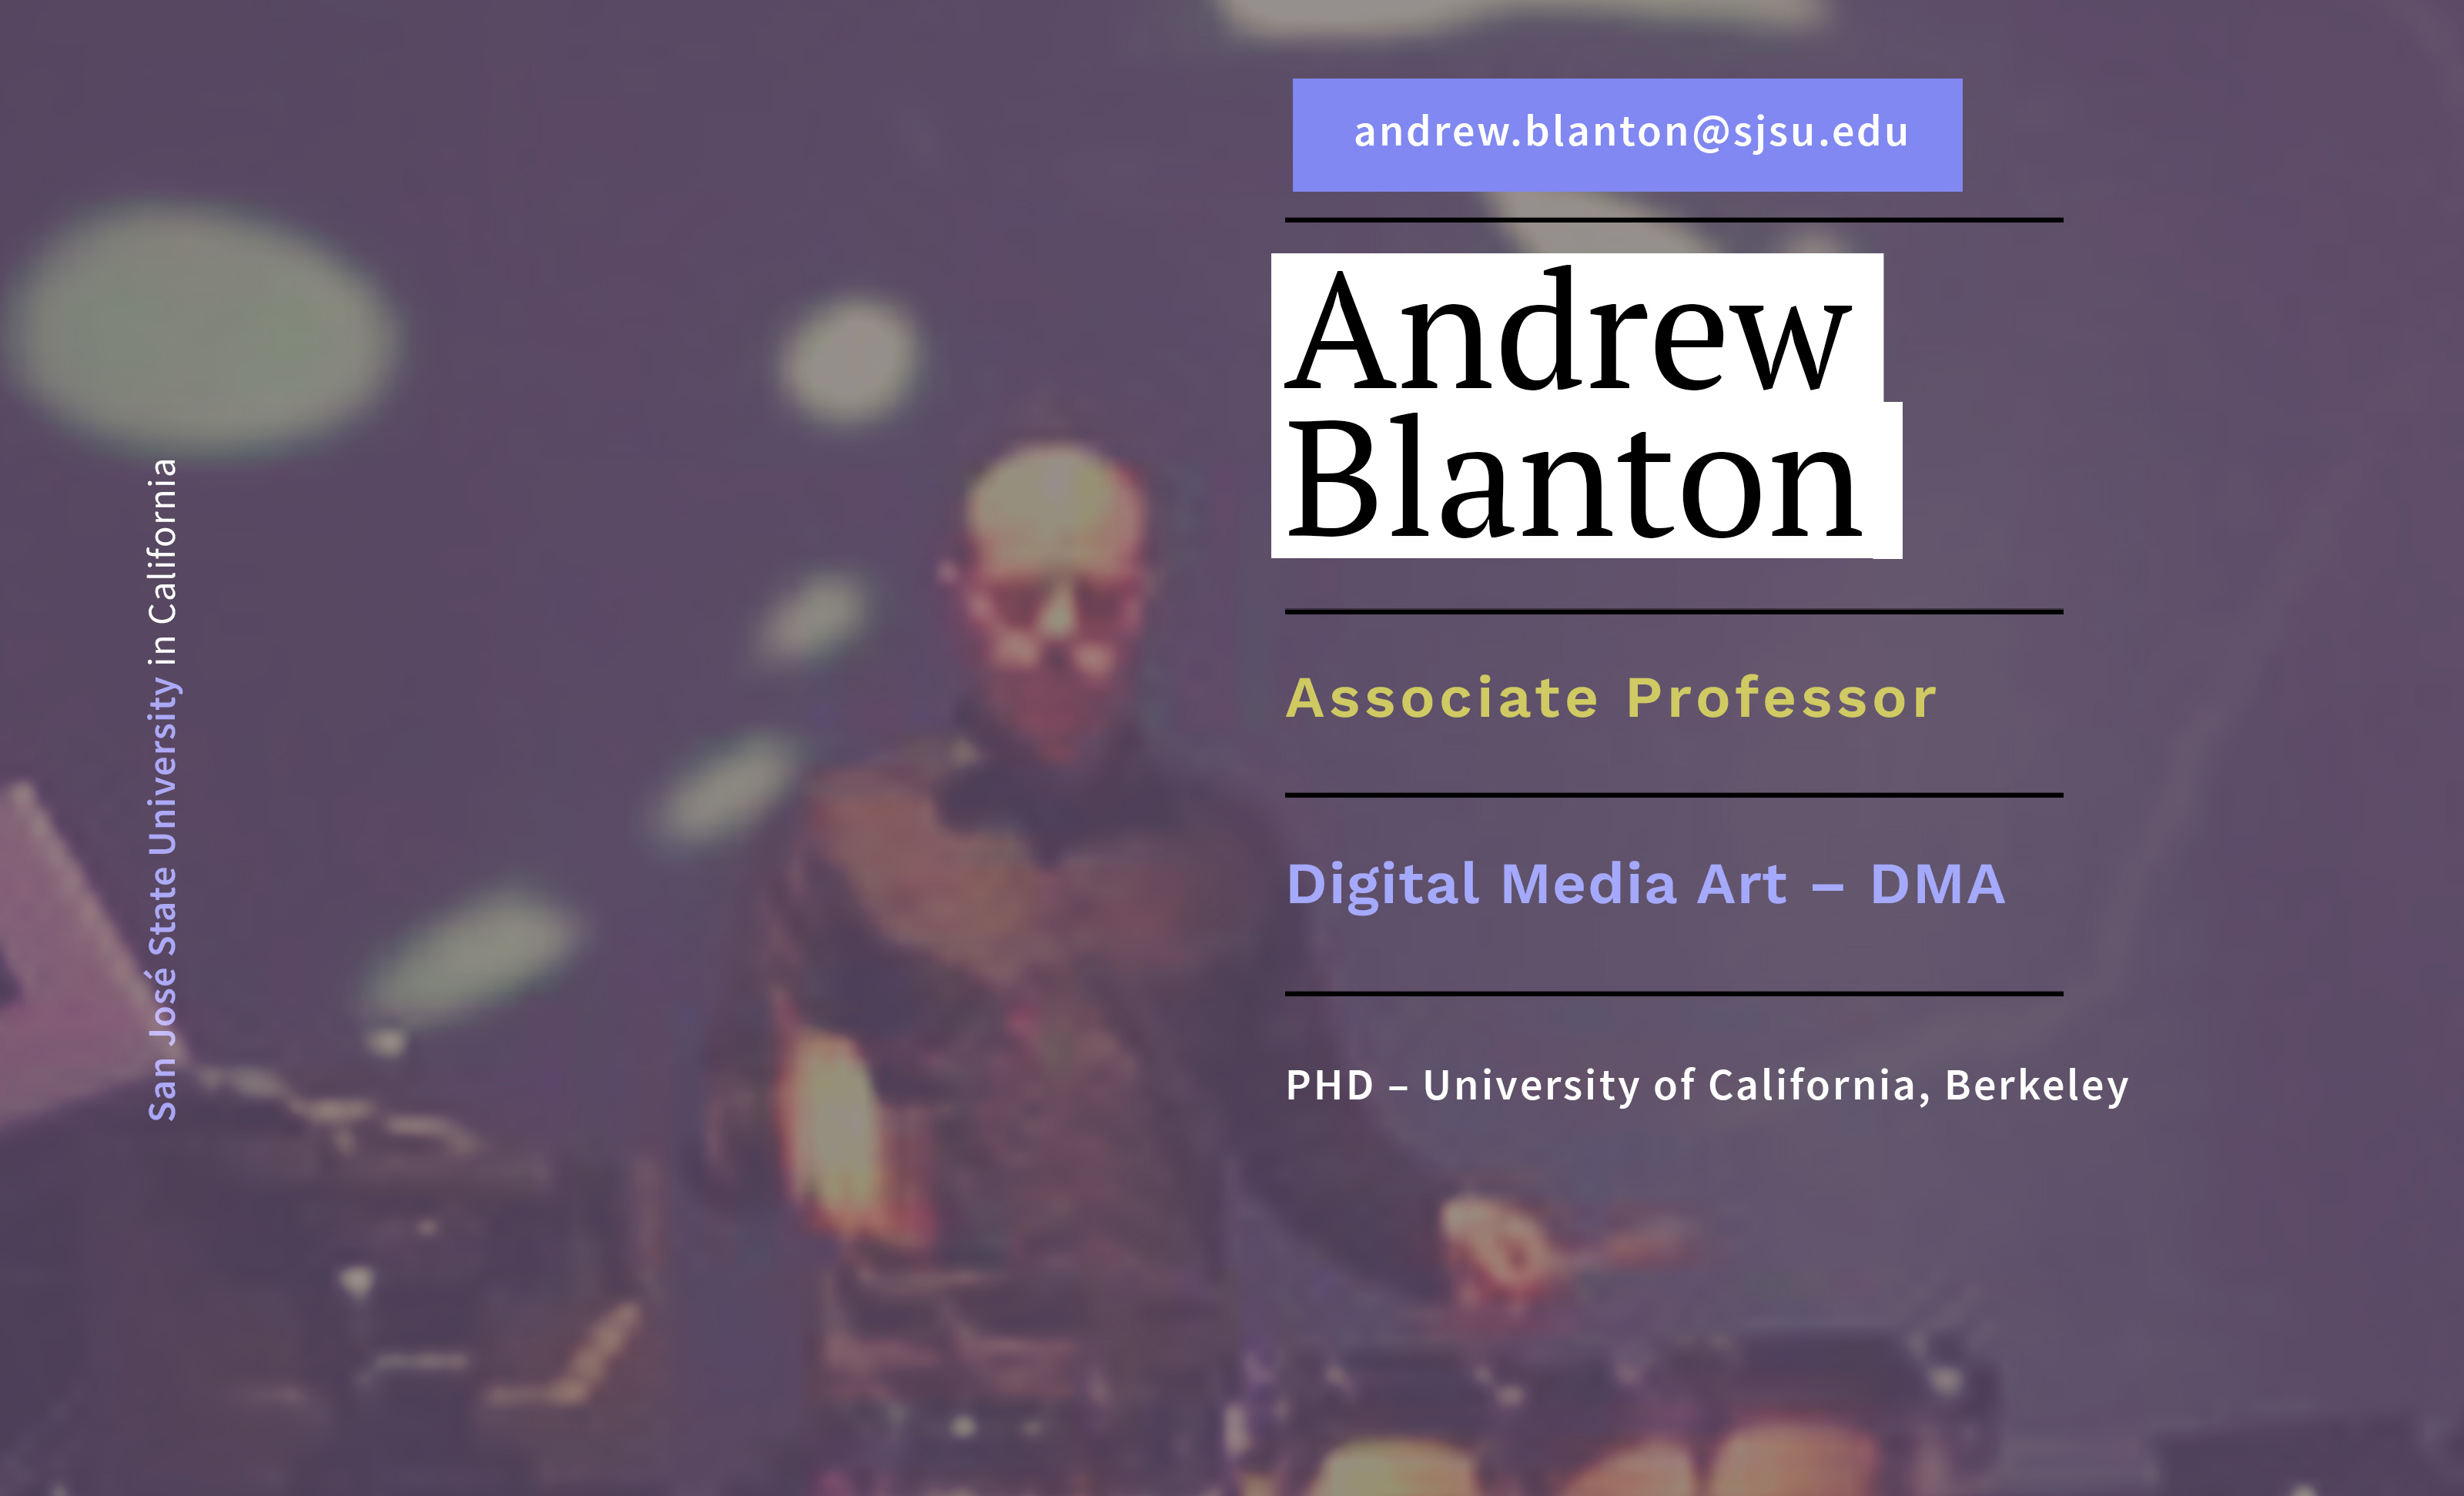 Faculty card of Andrew Blanton playing a percussion instrument